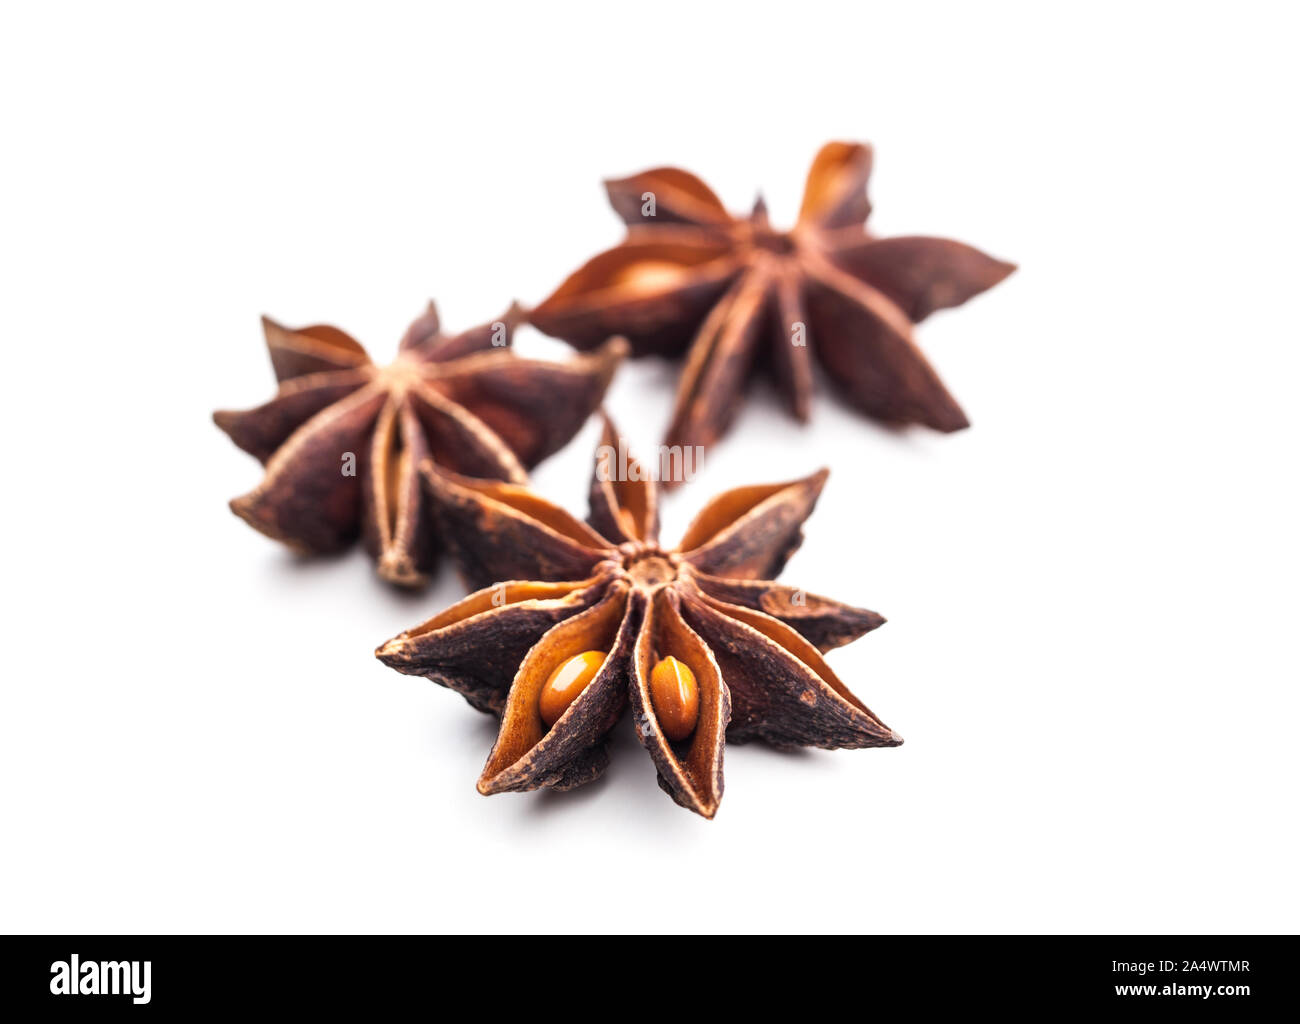 Christmassy spices - star anise Stock Photo